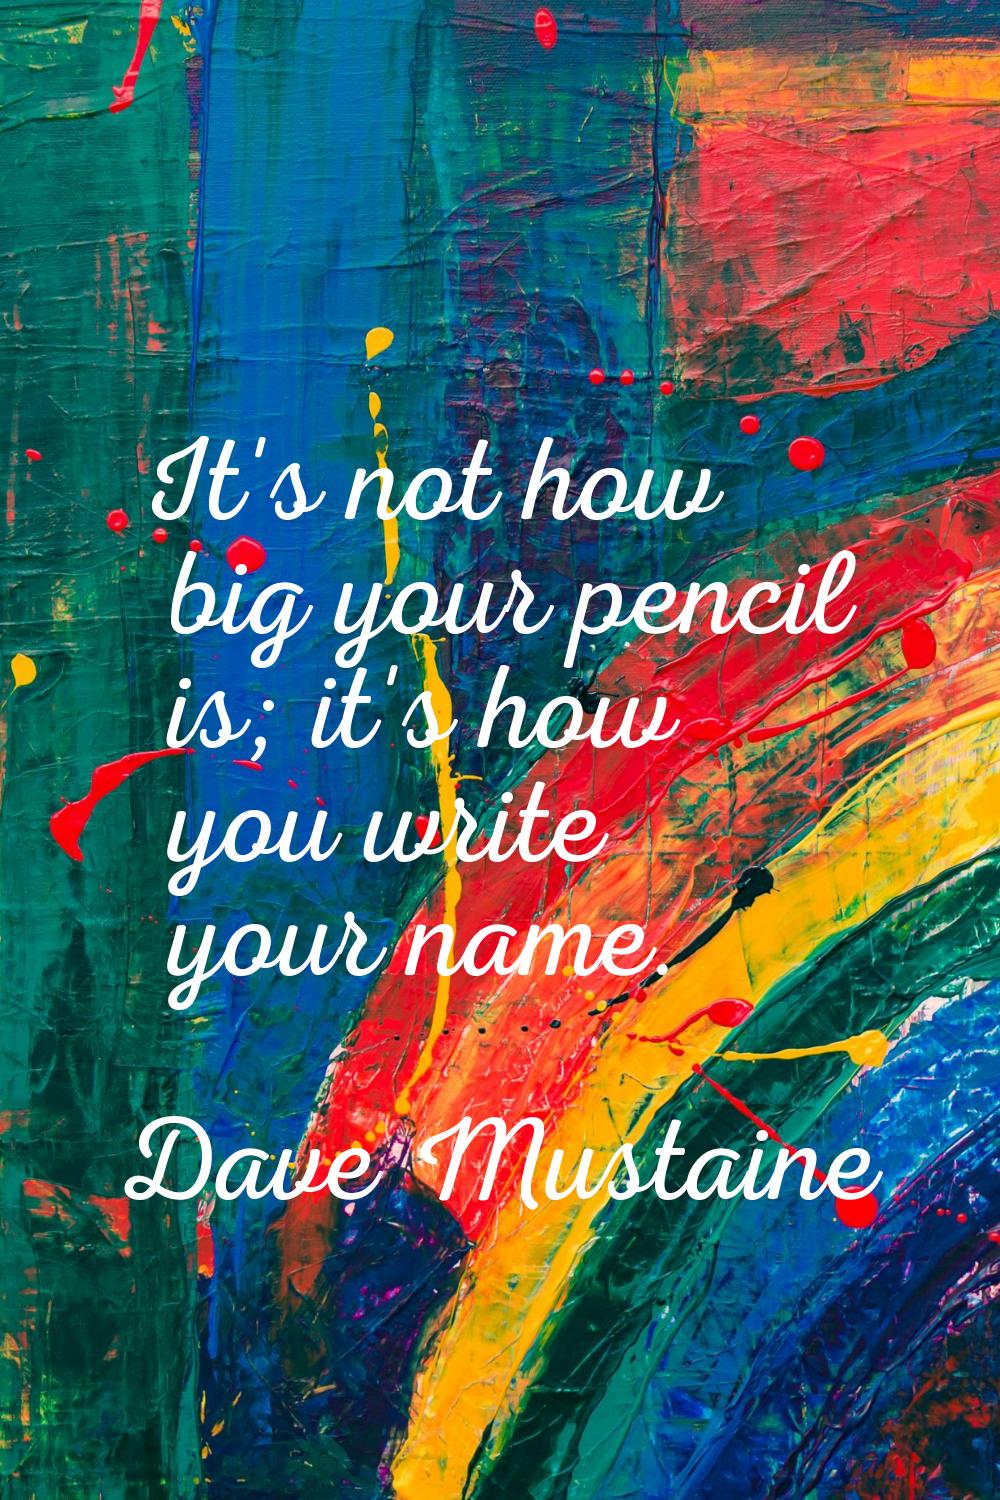 It's not how big your pencil is; it's how you write your name.